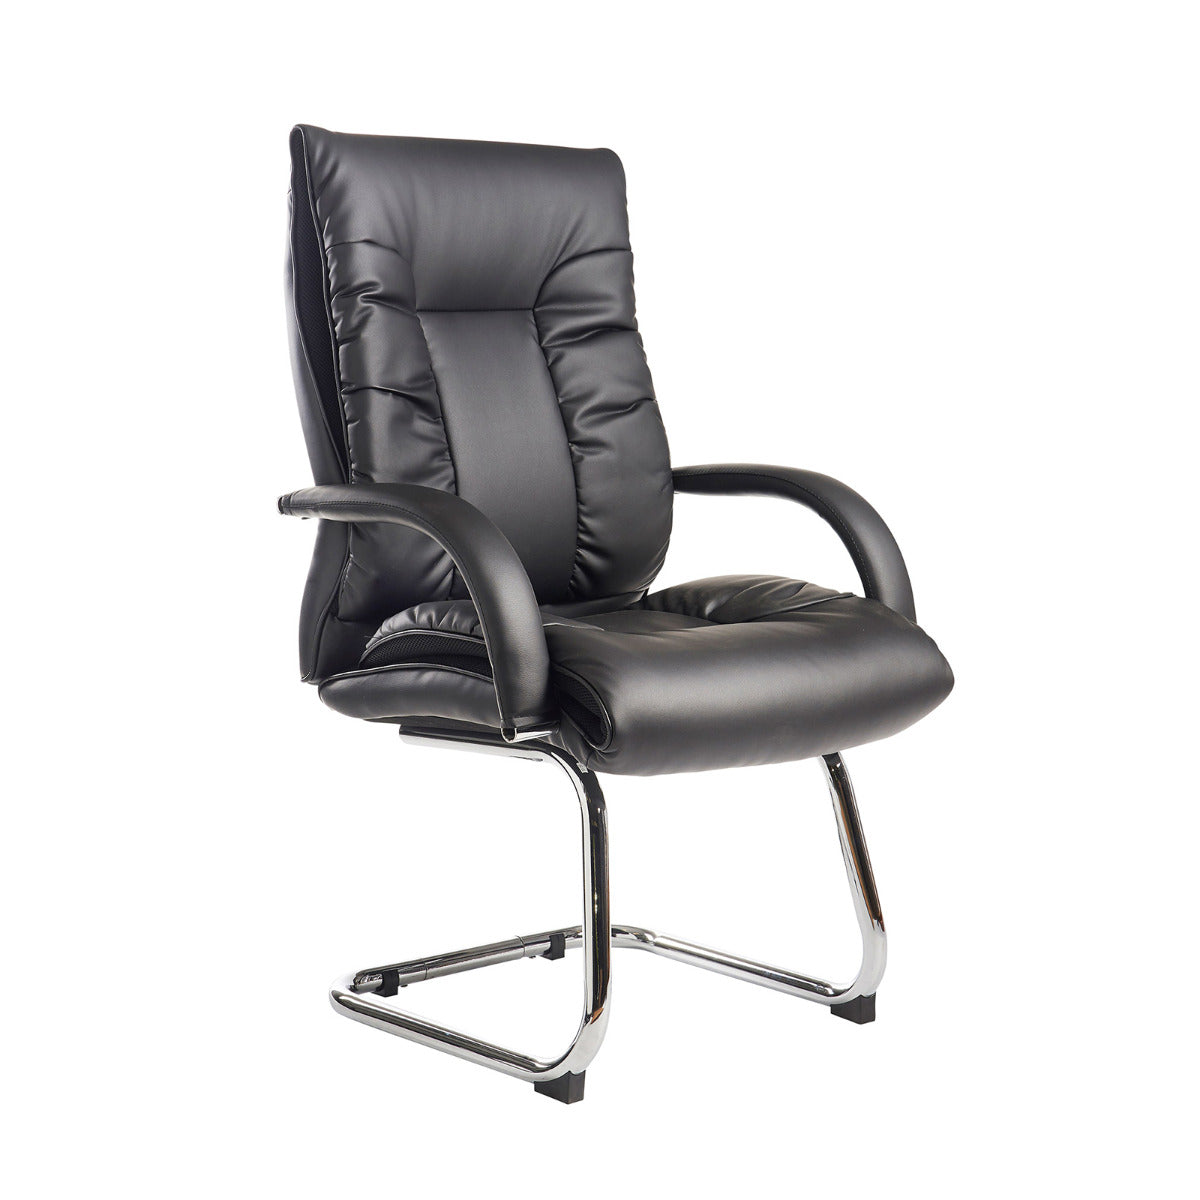 Derby High Back Black Faux Leather Visitor Chair UK